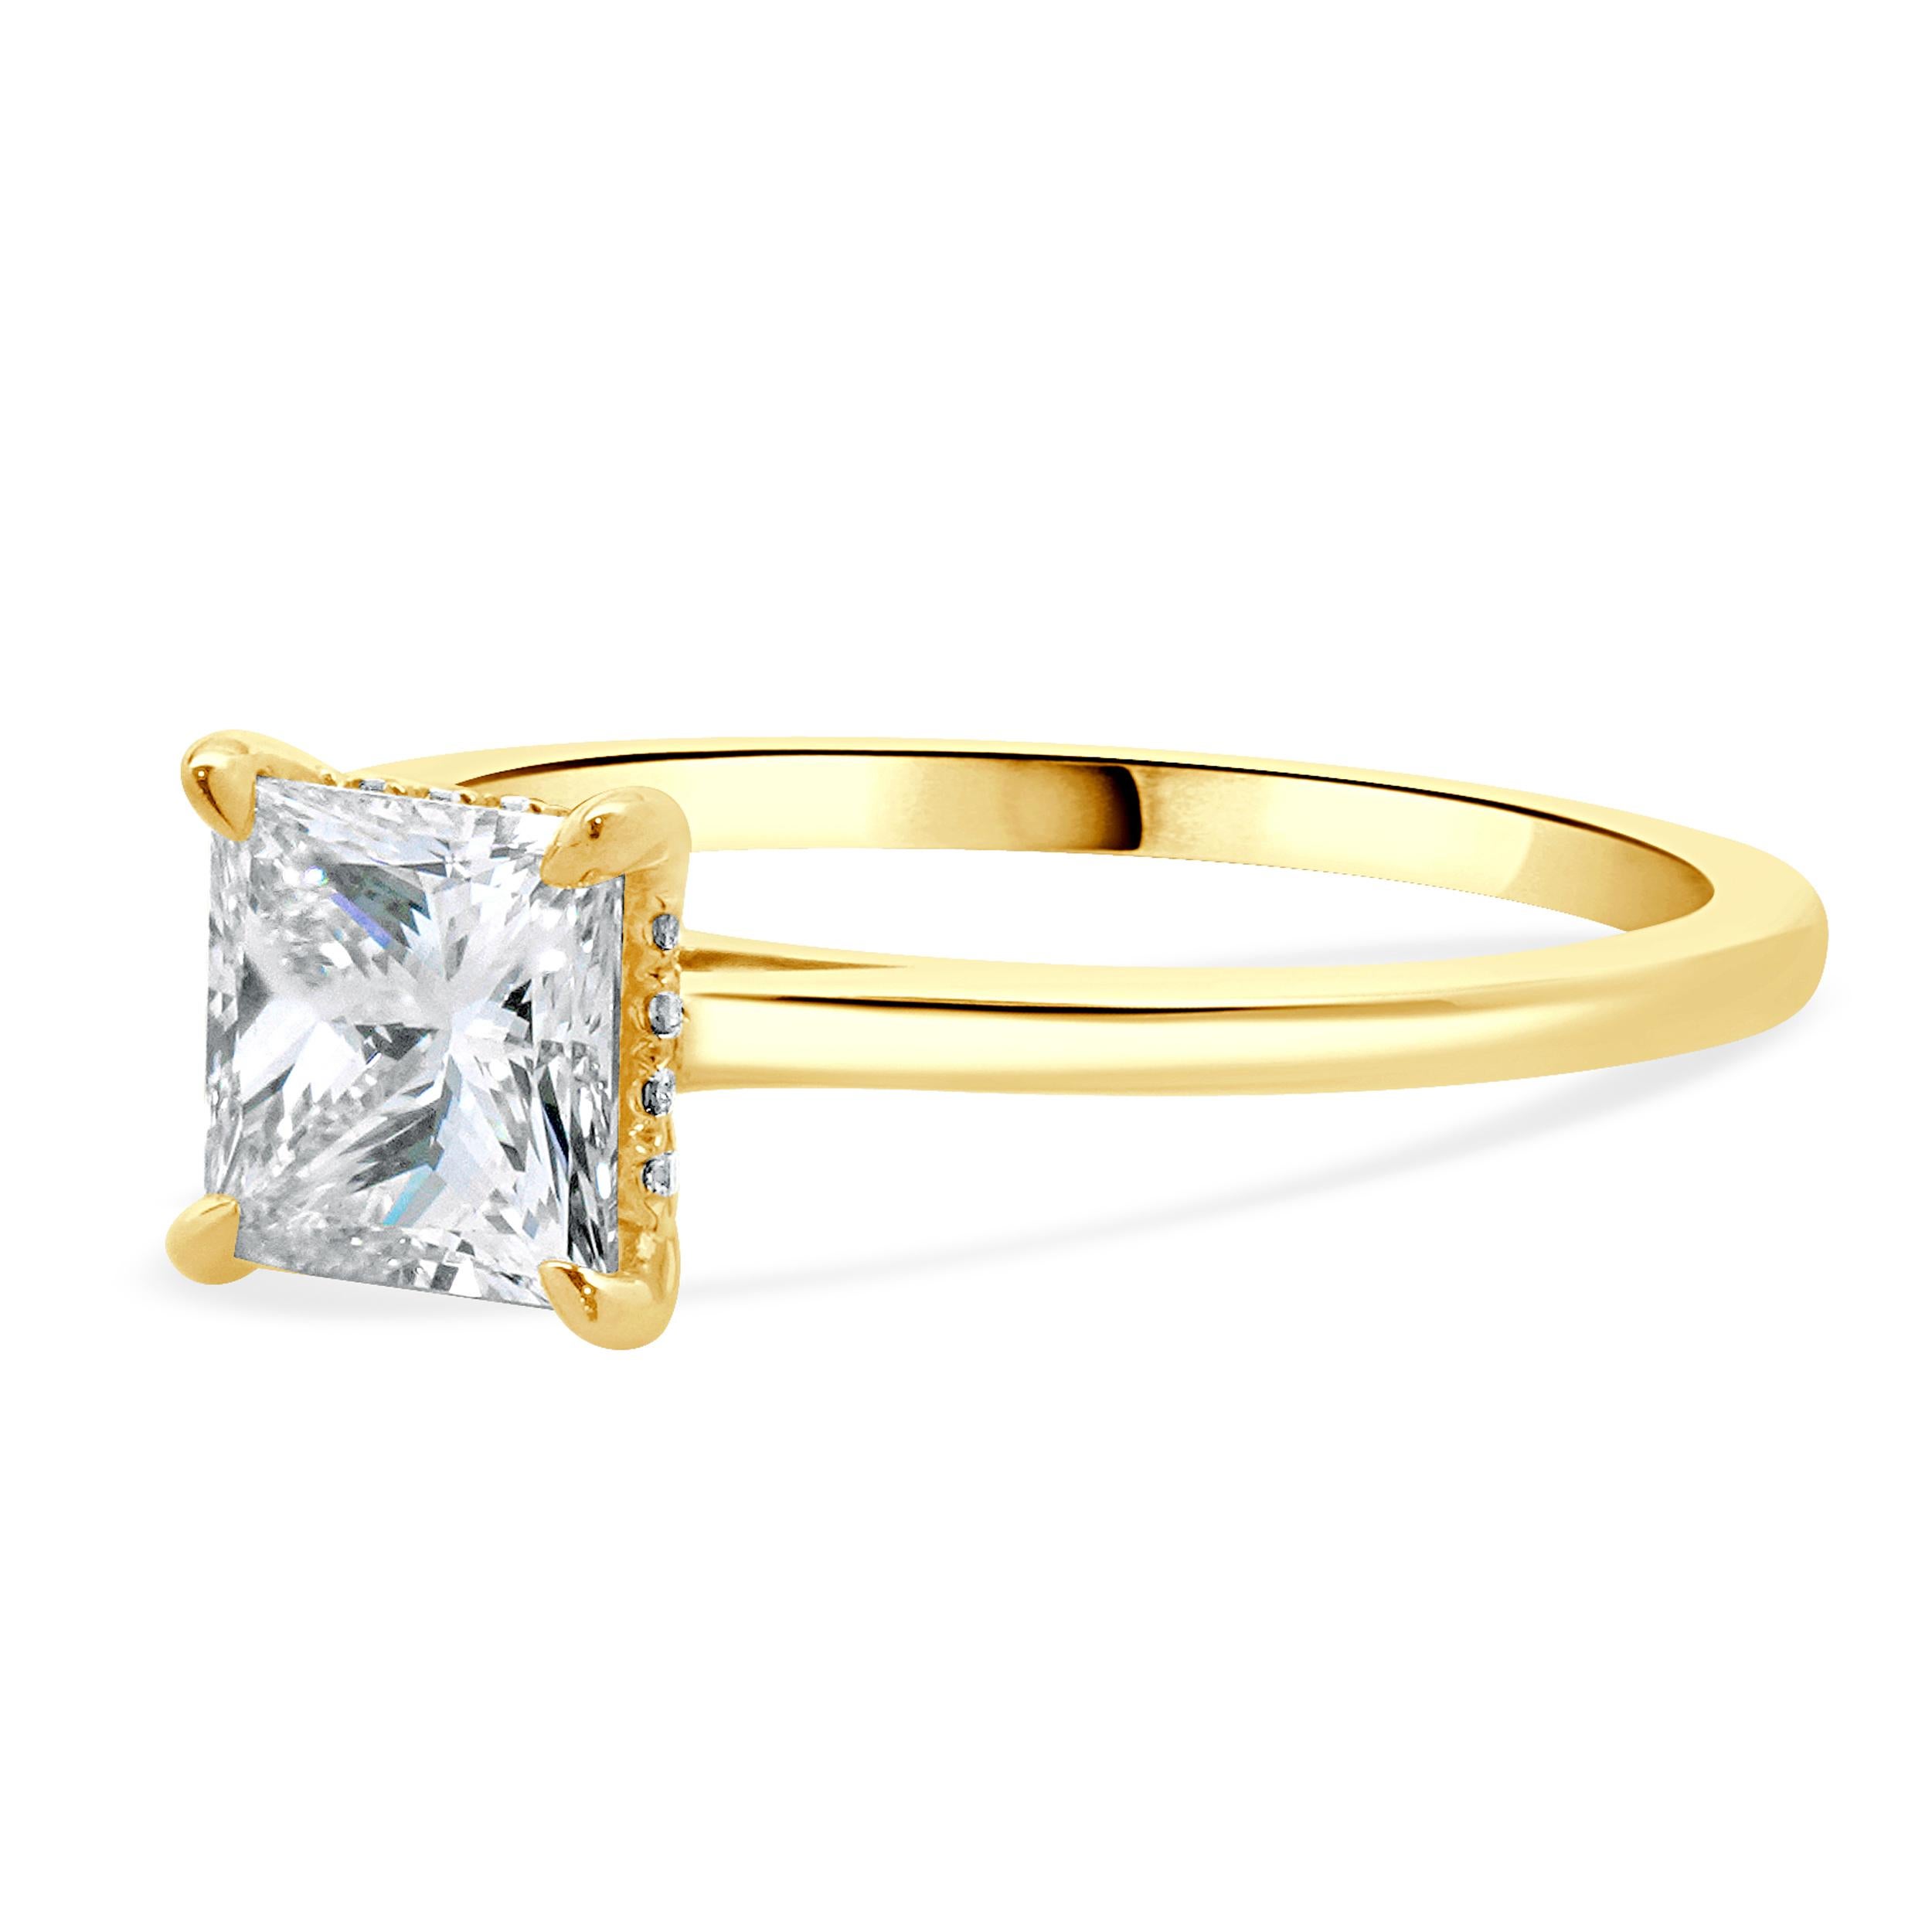 Designer: custom
Material: 14K yellow gold
Diamond: 1 princess cut = 1.10ct
Color: G
Clarity: VS1
GIA: 2151204687
Diamond: 16 round brilliant cut = 0.06cttw
Color: G
Clarity: VS1-2
Dimensions: ring top measures 6mm wide
Ring Size: 6.5 (complimentary